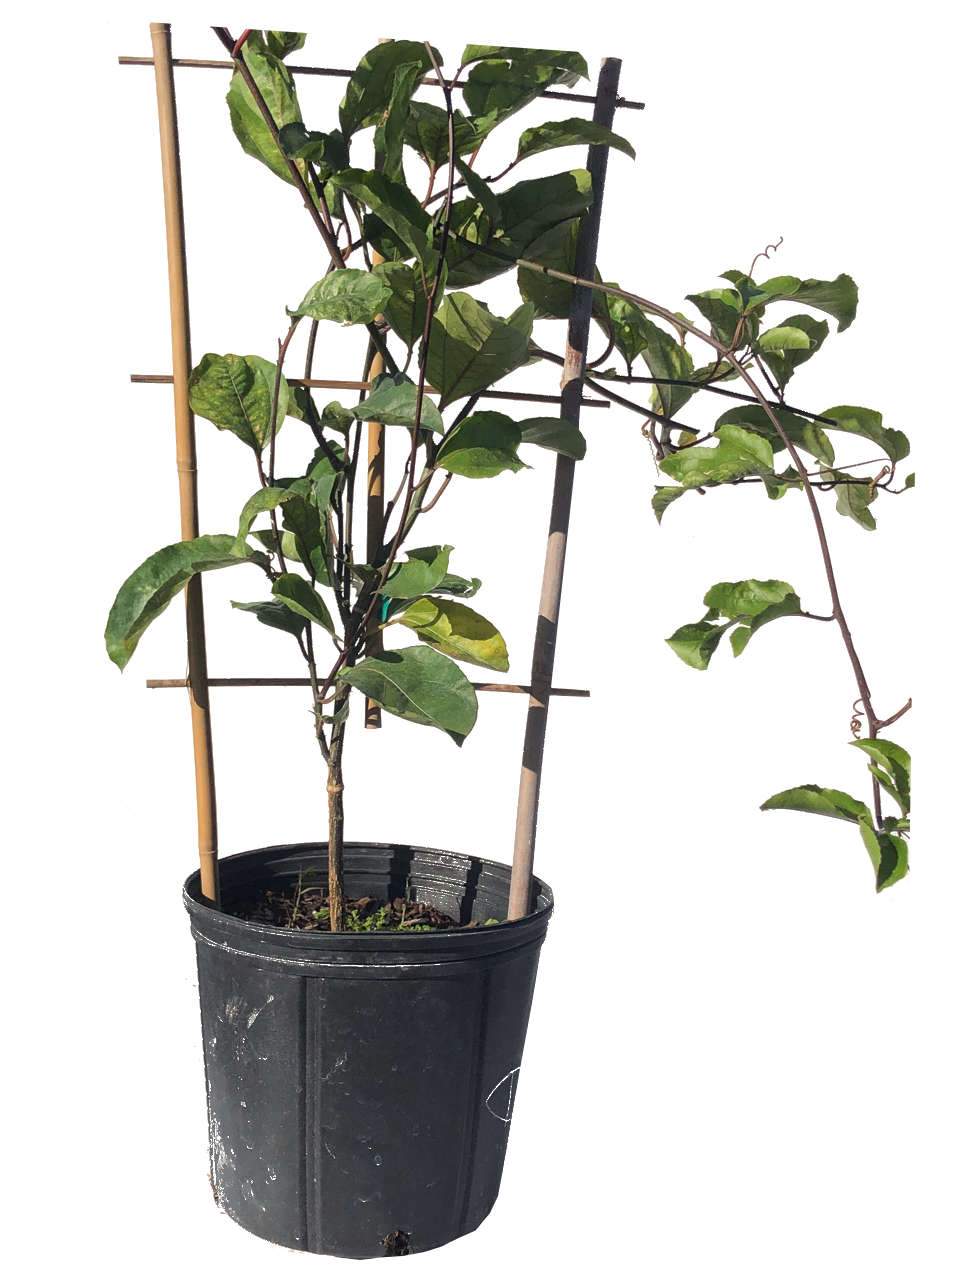 Passion Fruit Vine Yellow Variety, 2 Feet Tall, 3-gal Container from Florida